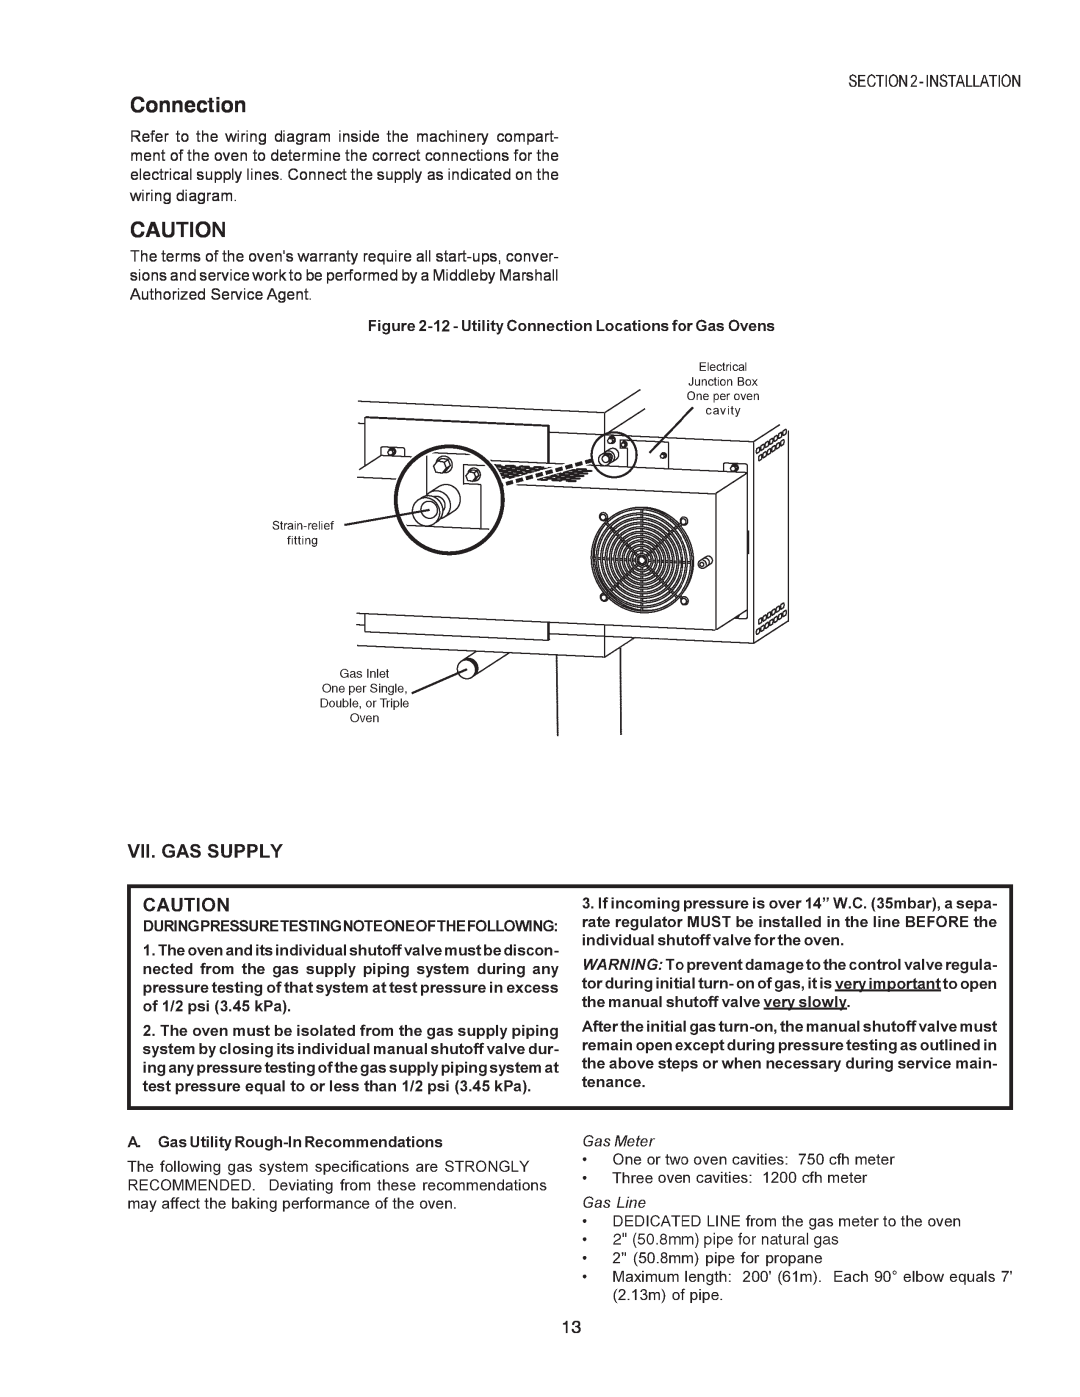 Middleby Cooking Systems Group PS770 installation manual Connection, wiring diagram 